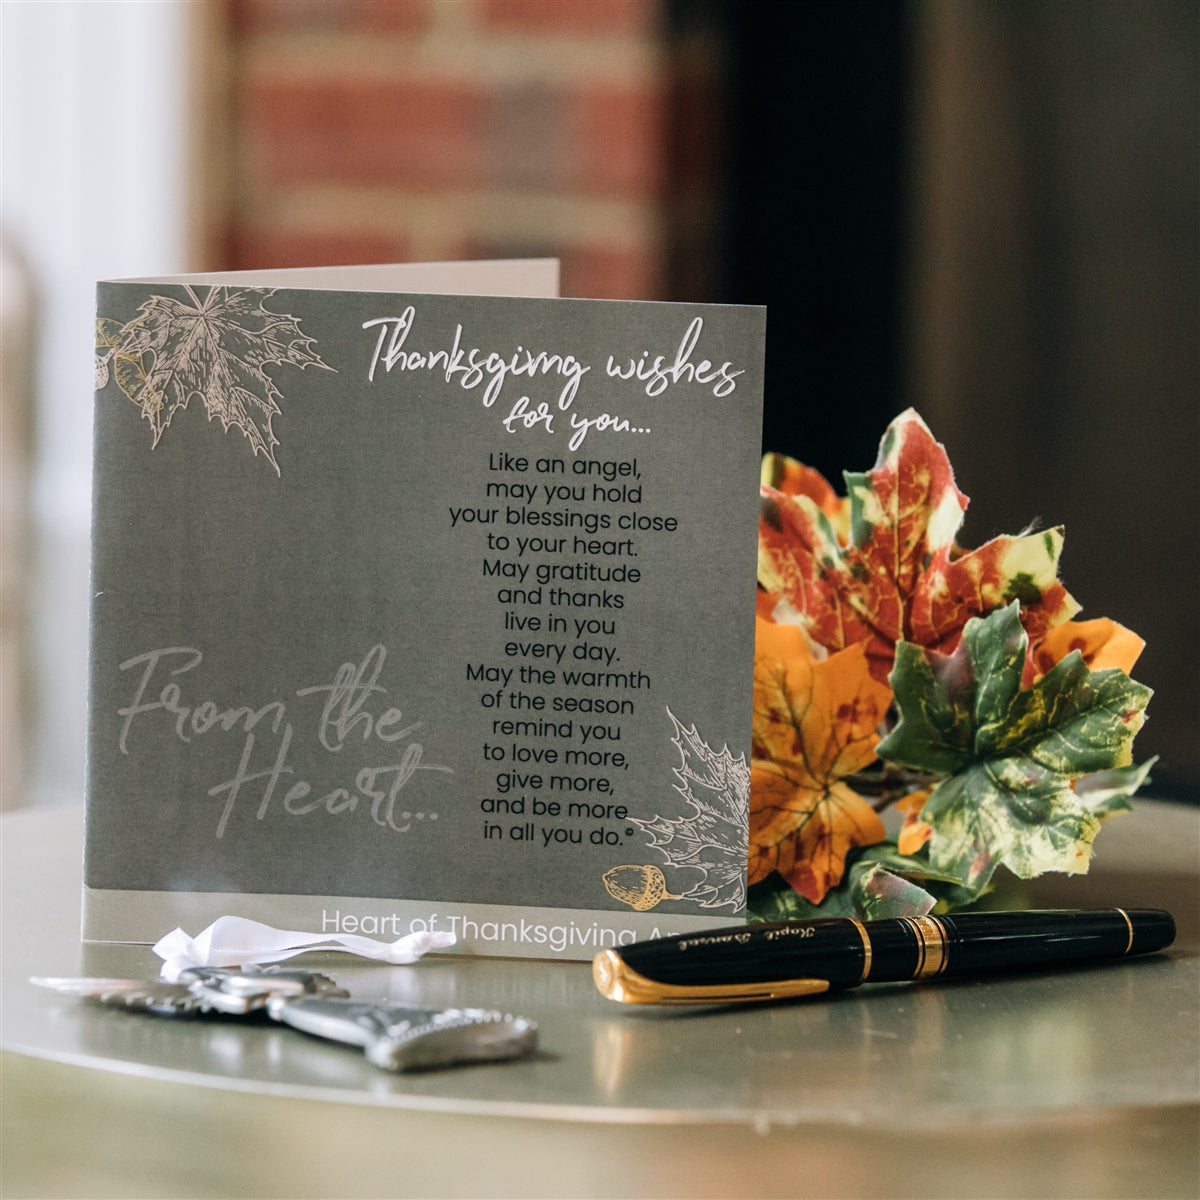 Thanksgiving Wishes card standing open on a table showing the inside where the giver can write a message.